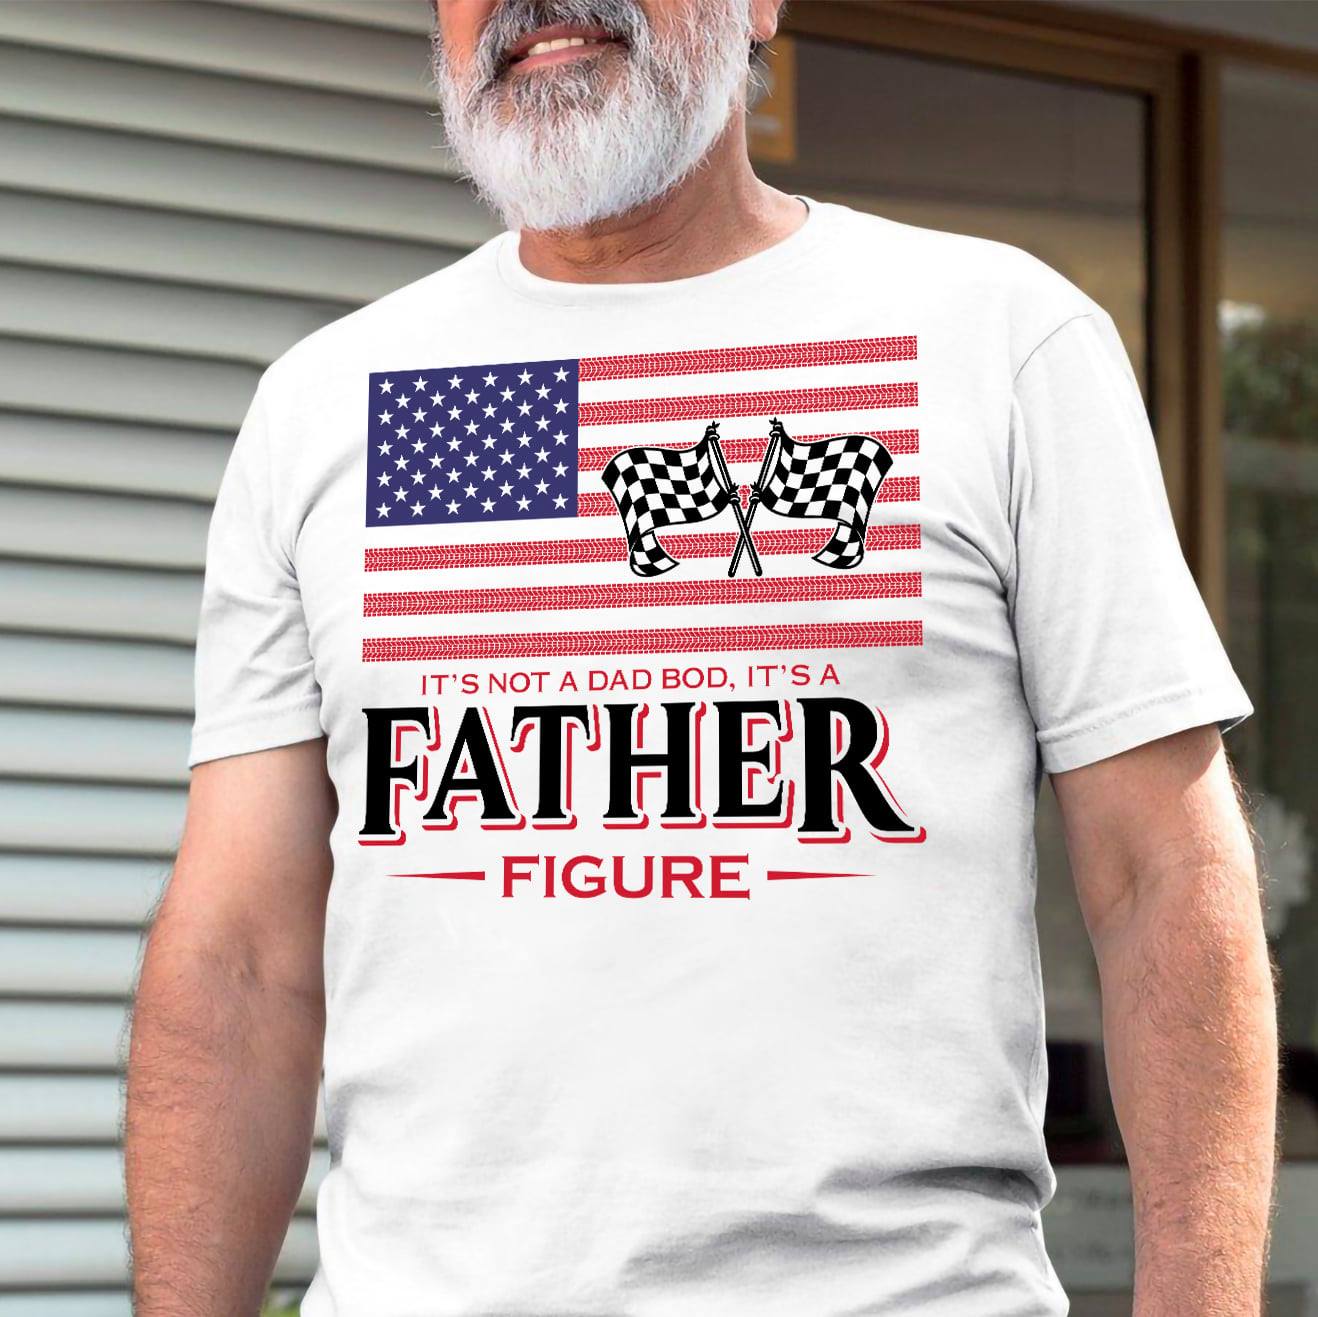 It's not a dad bod, it's father figure - America flag, dirt track racing